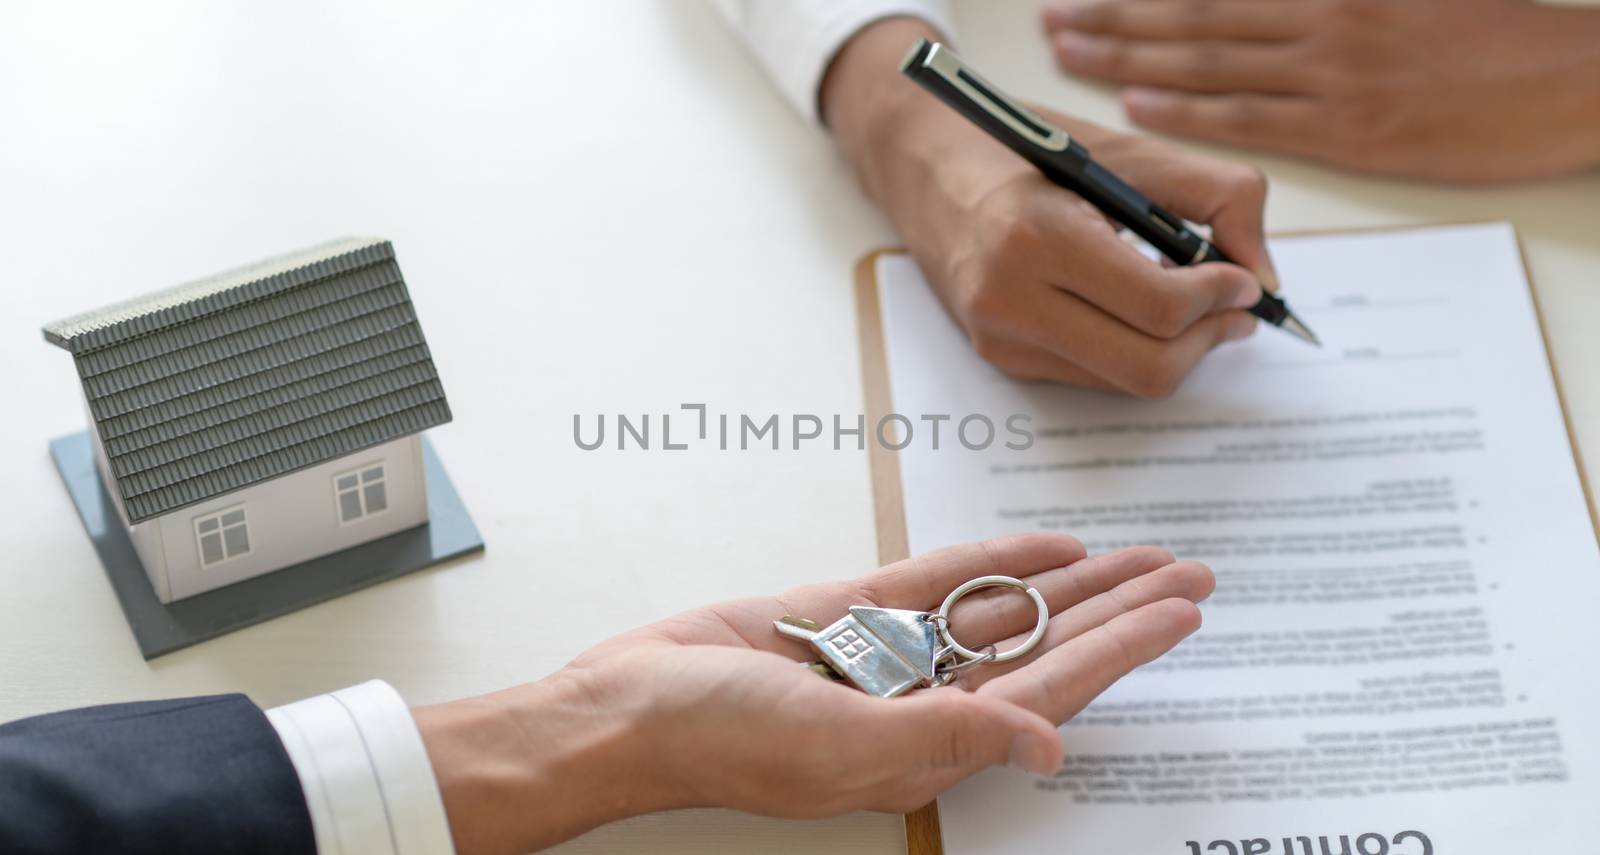 Signing a loan for a home purchase. by poungsaed